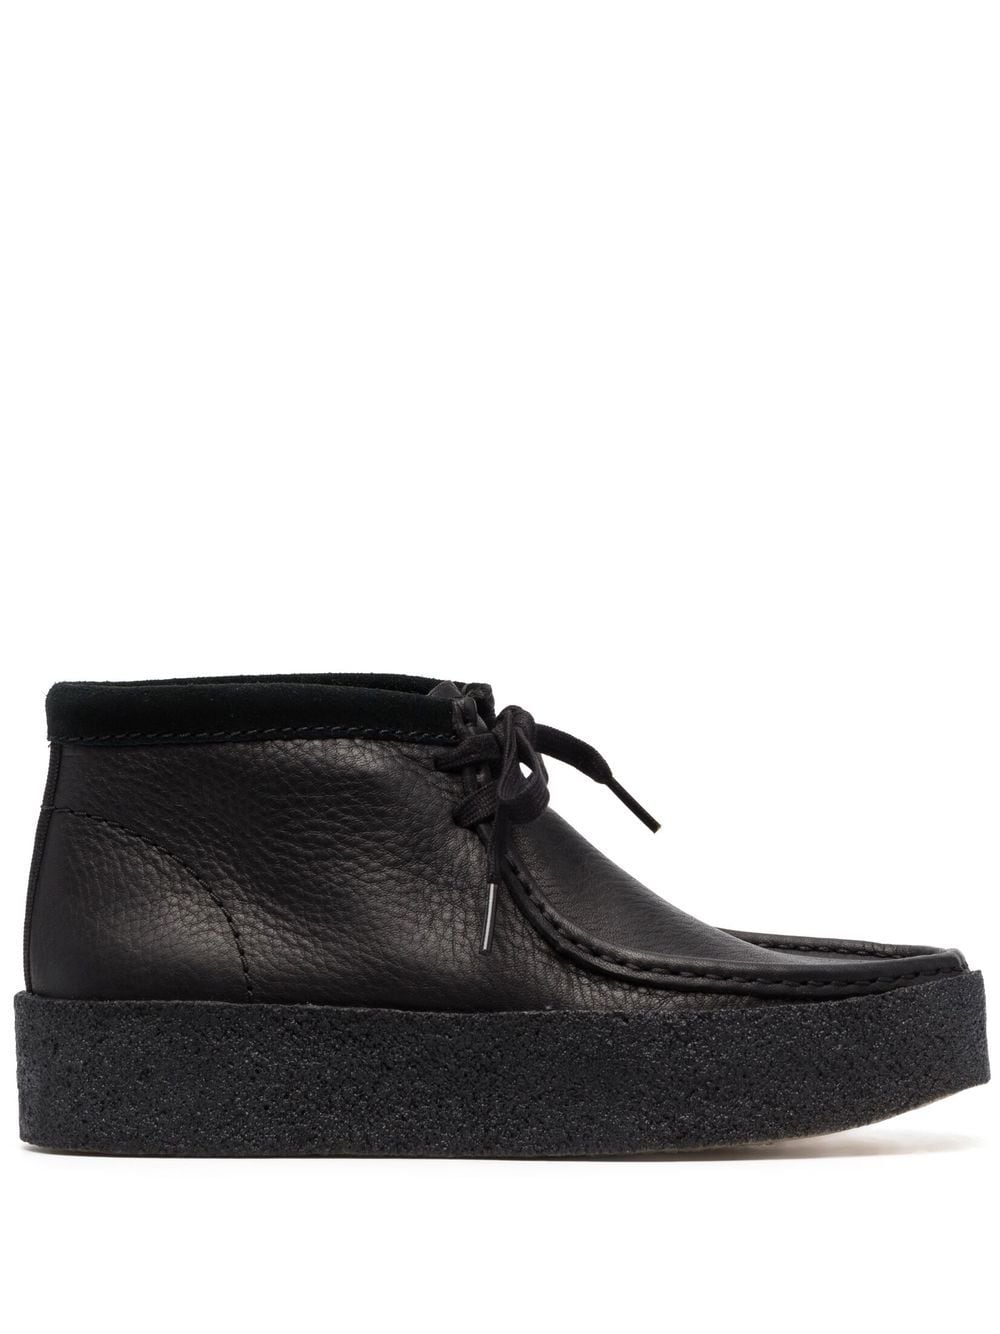 CLARKS CLARKS- Wallabee Cup Bt Leather Shoes